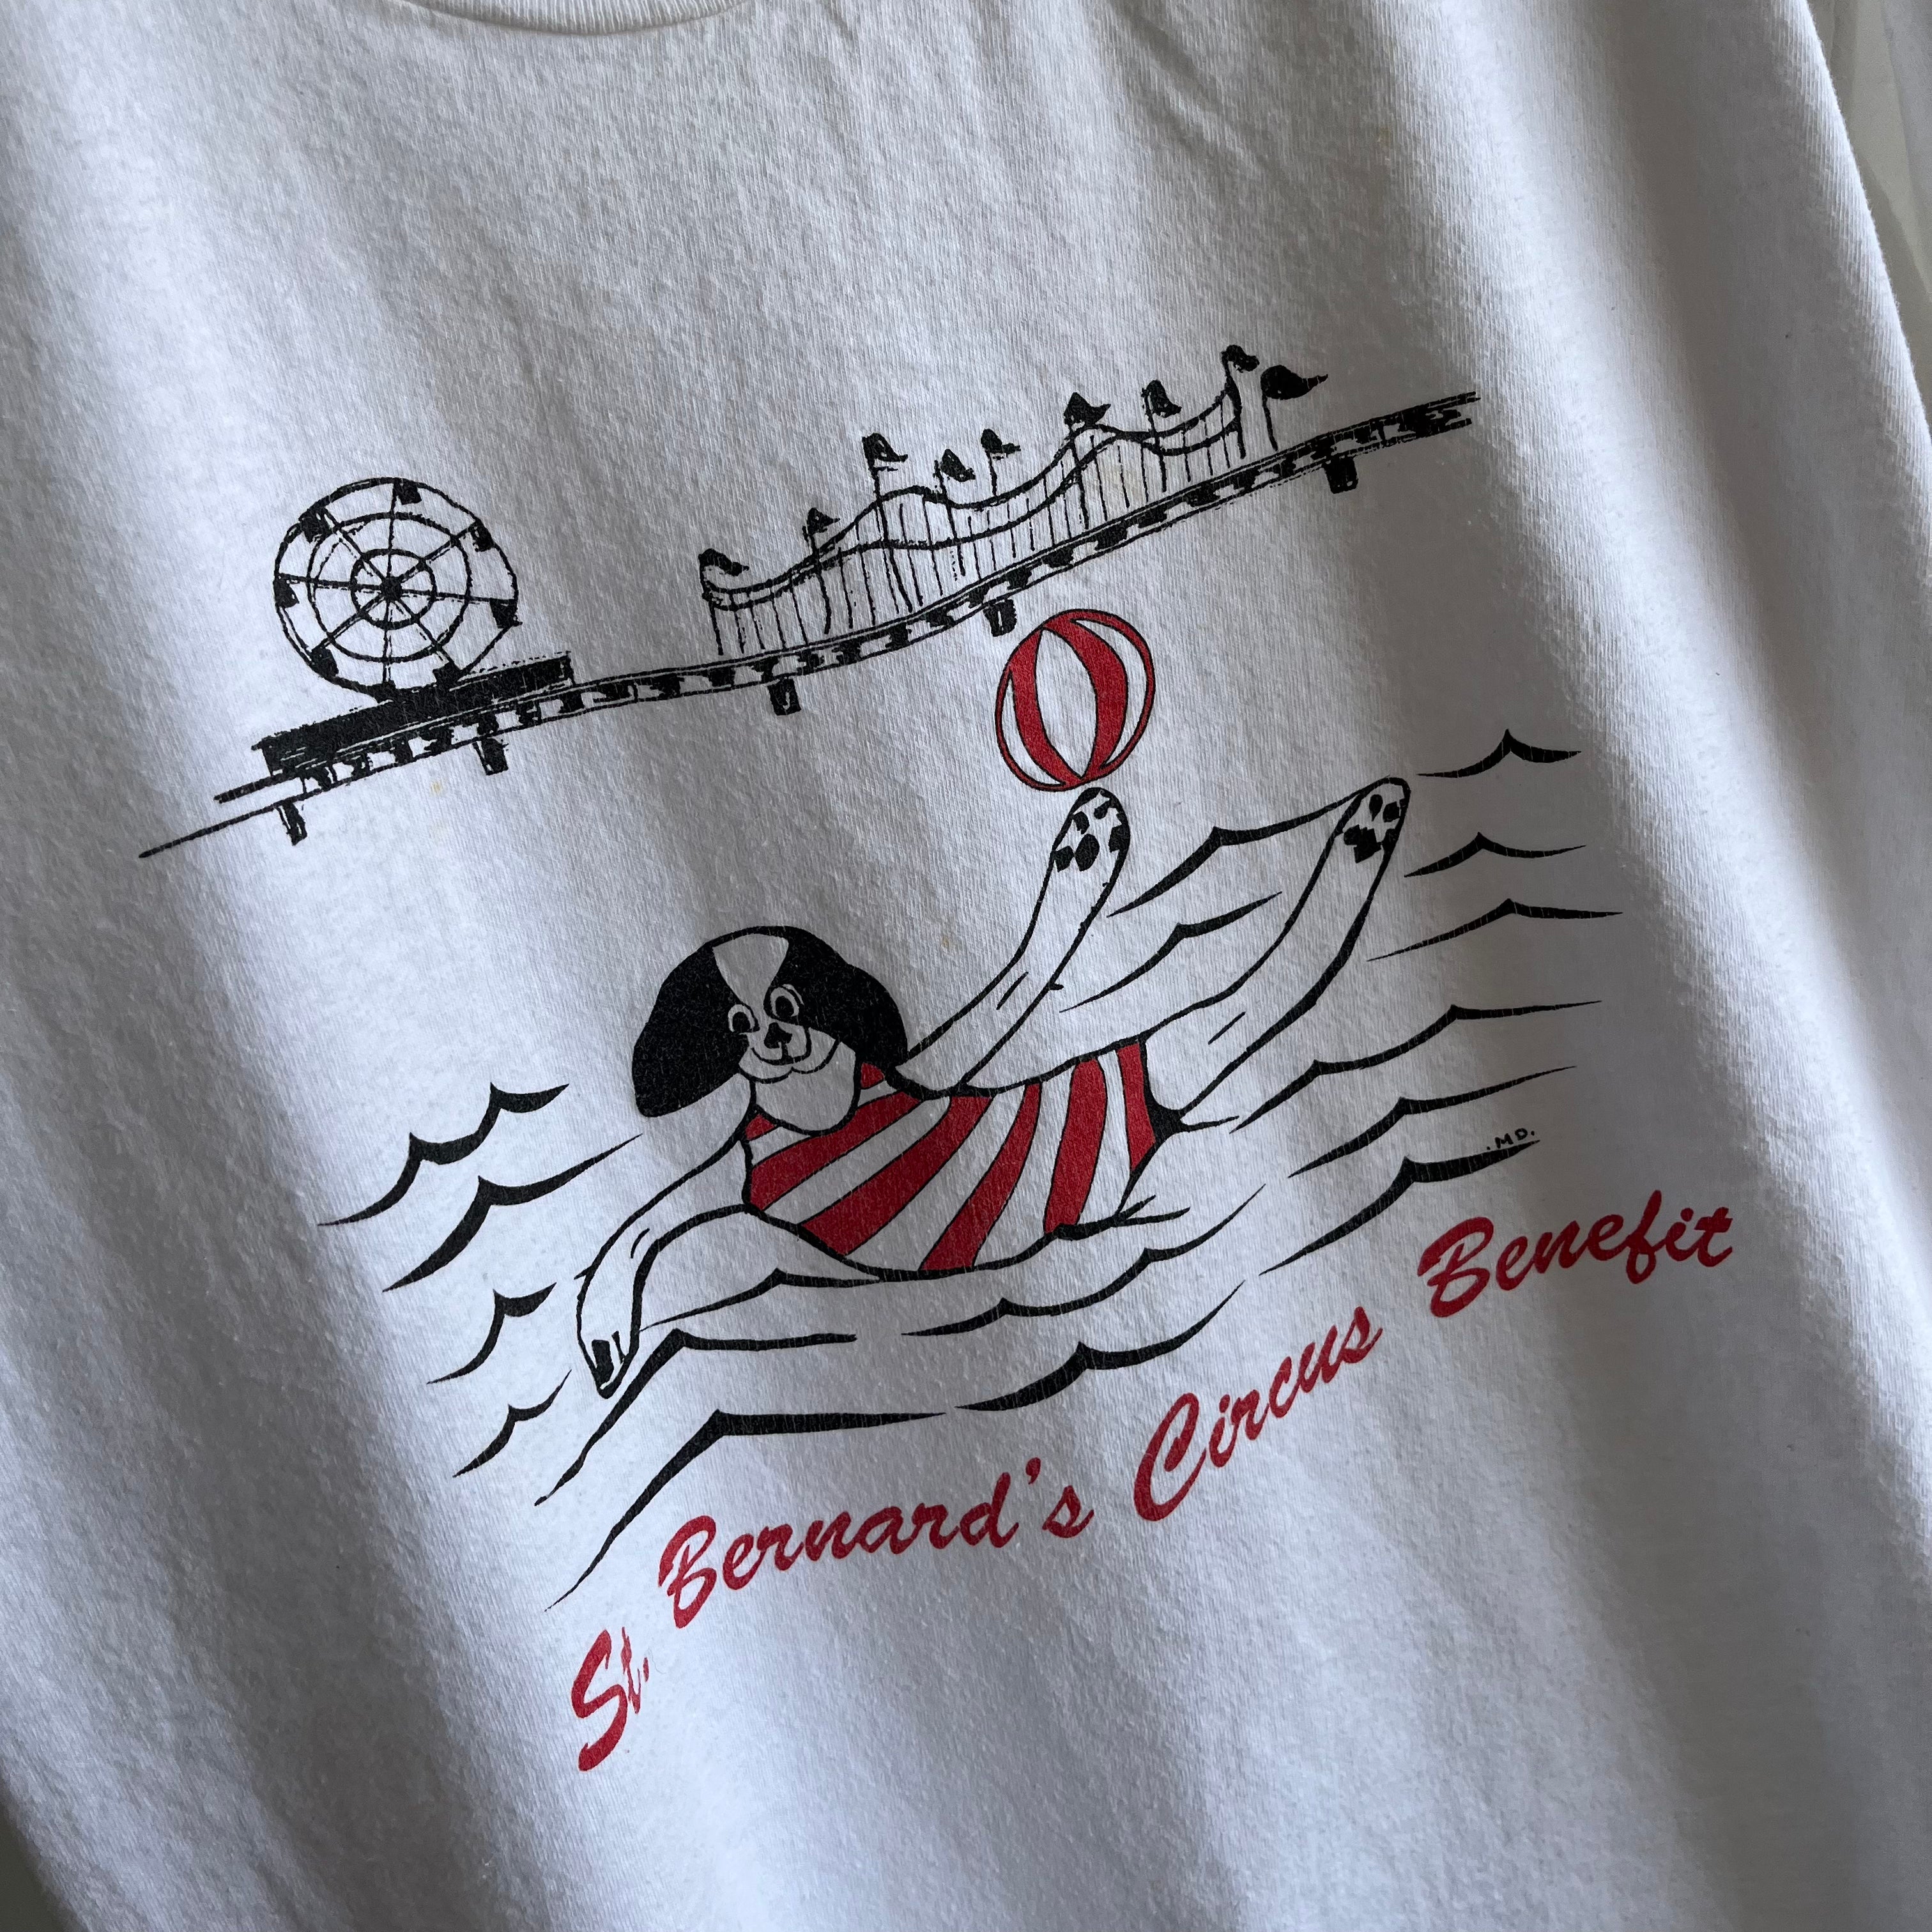 1980s St. Bernard's Circus Benefit Front and Back T-Shirt - WOWOWOWOW